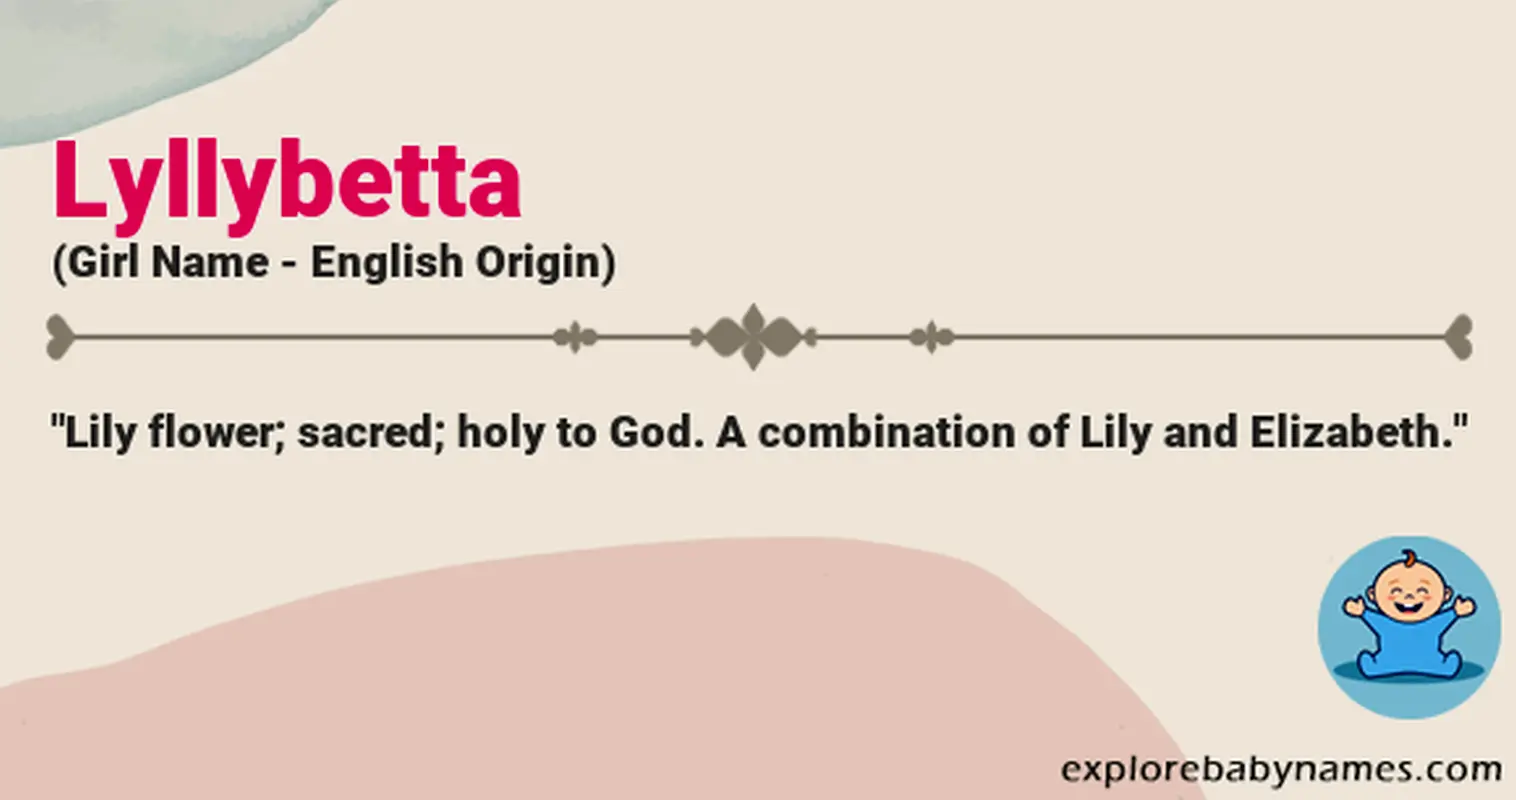 Meaning of Lyllybetta